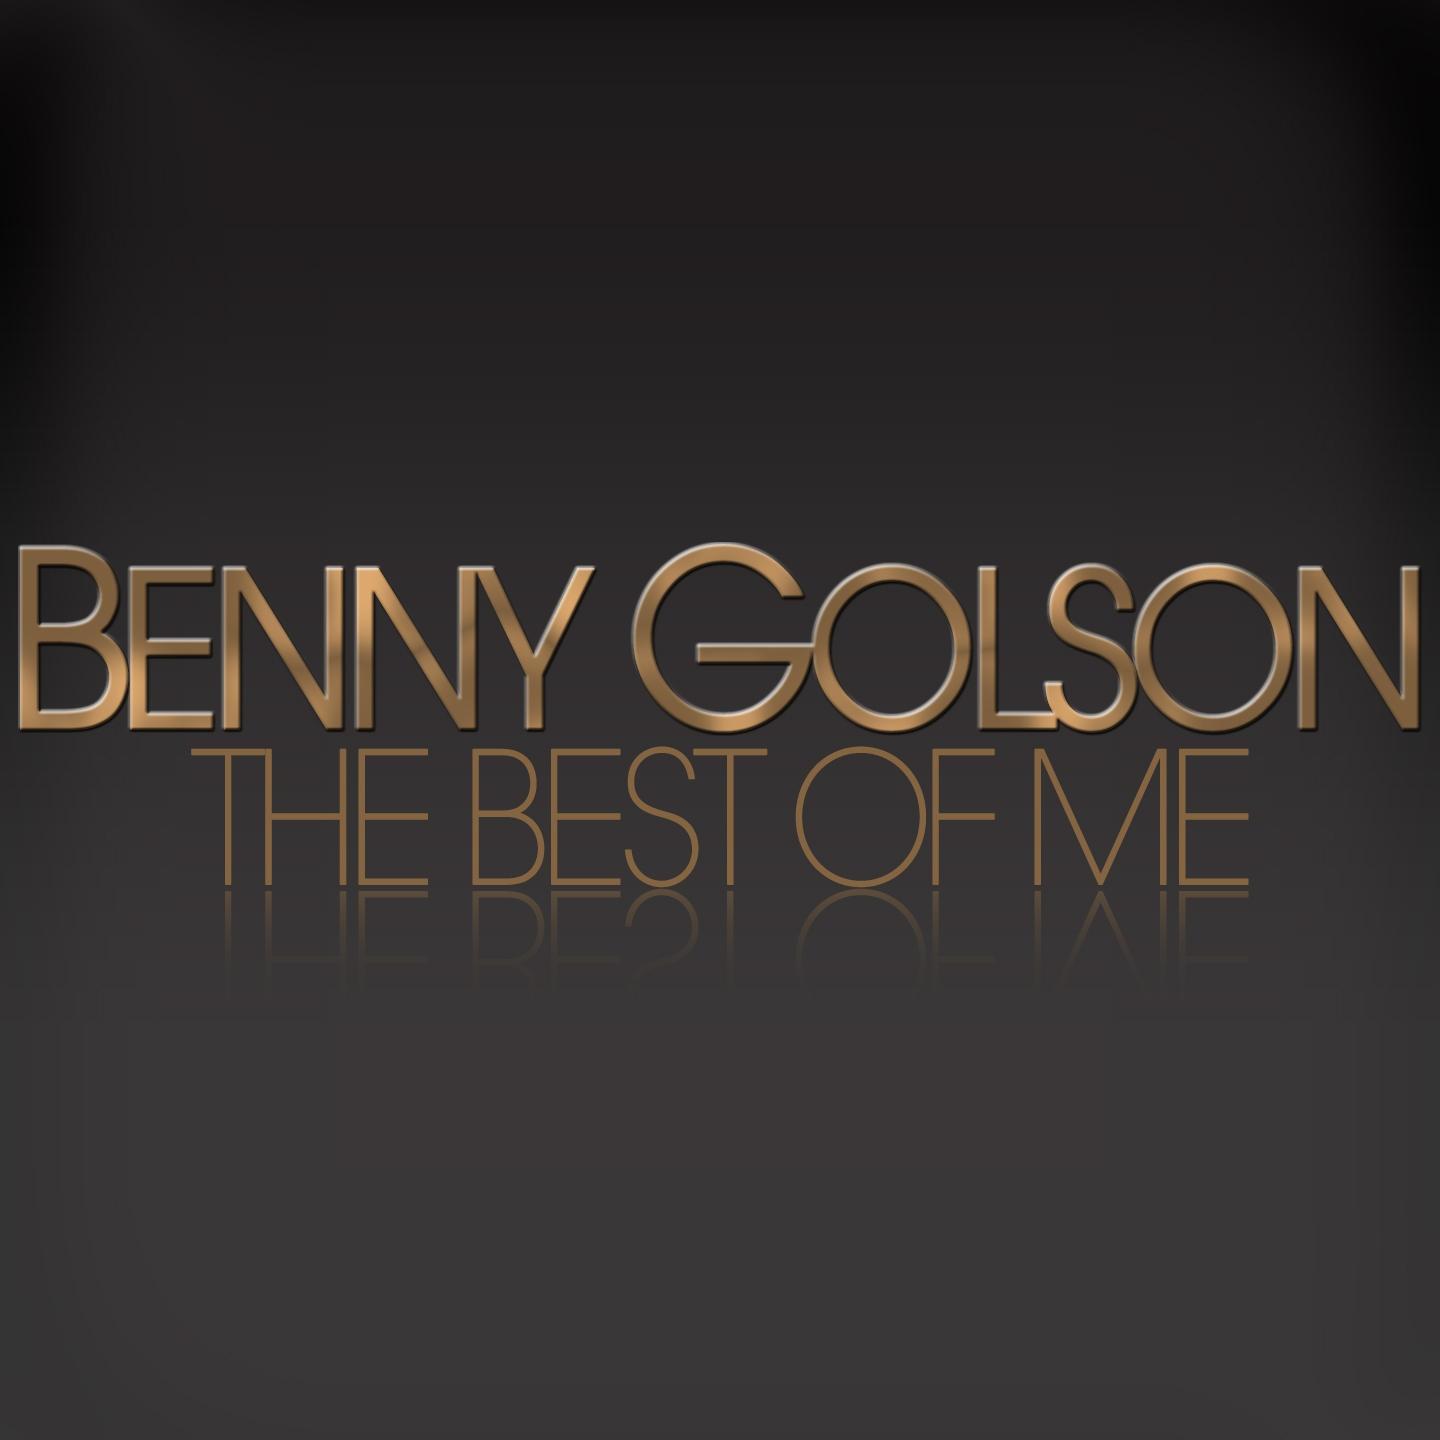 The Best of Me - Benny Golson